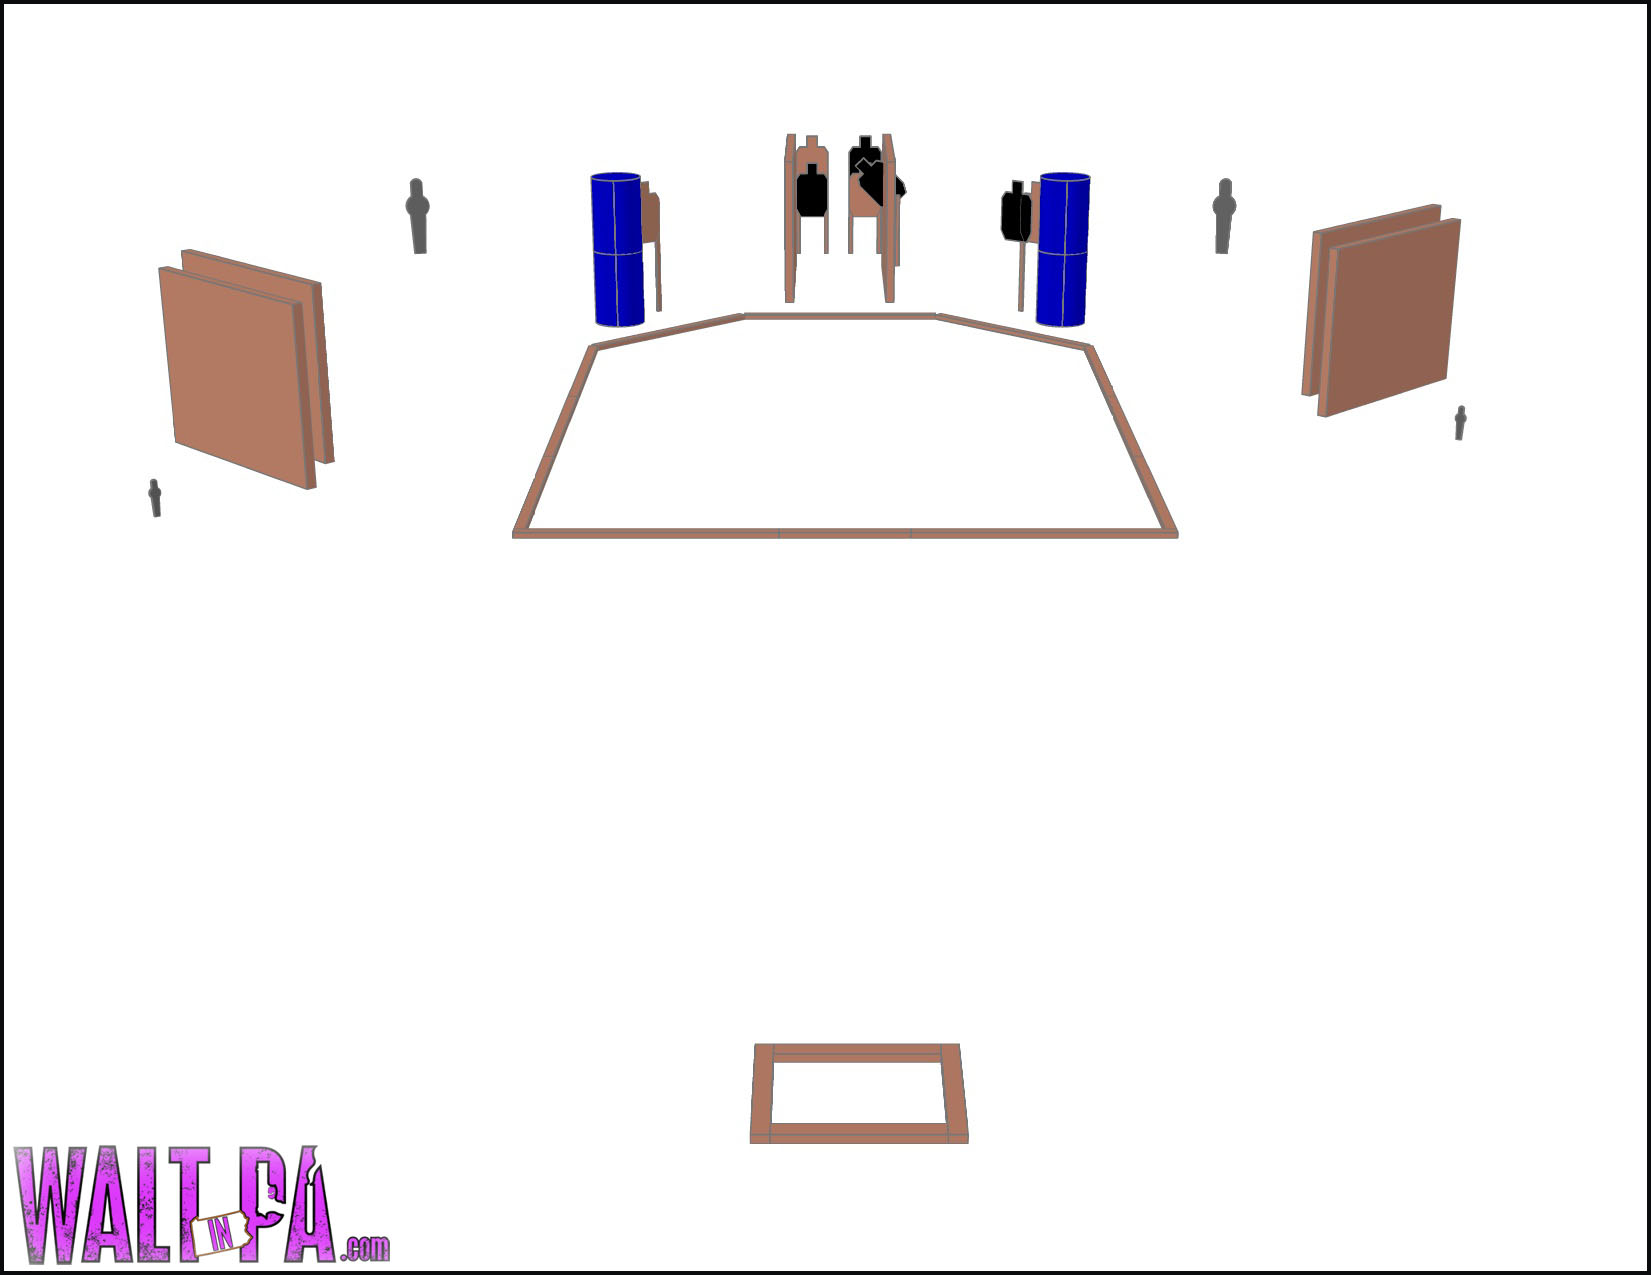 Walt In PA - USPSA Stage - 1 VIEW 1